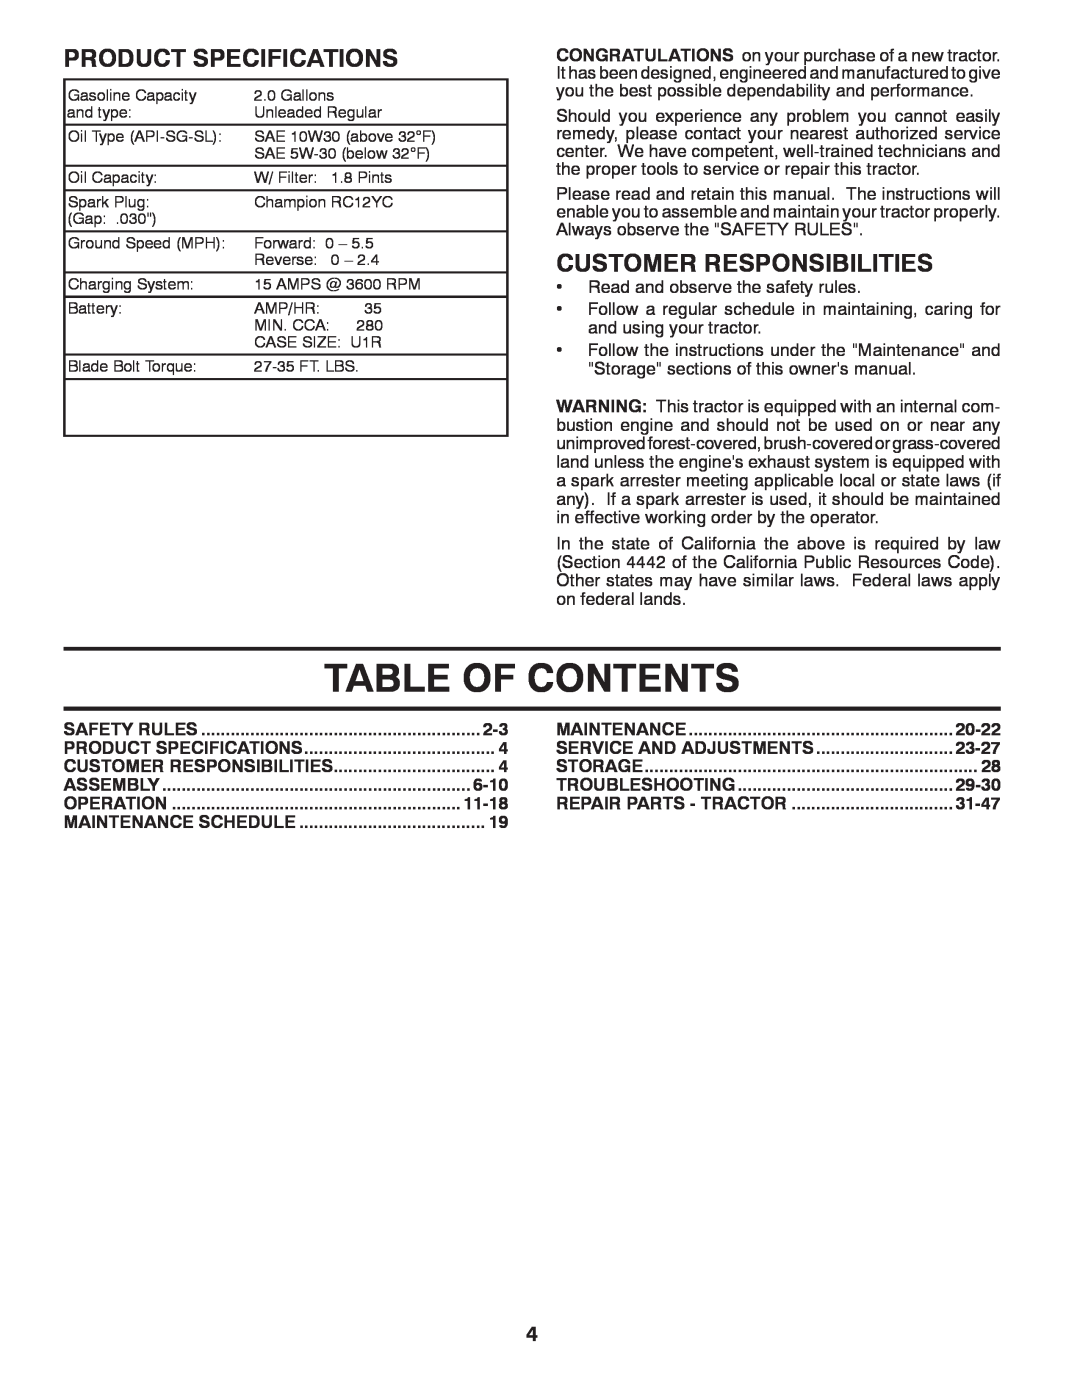 Husqvarna CTH2036 XP owner manual Table Of Contents, Product Specifications, Customer Responsibilities 